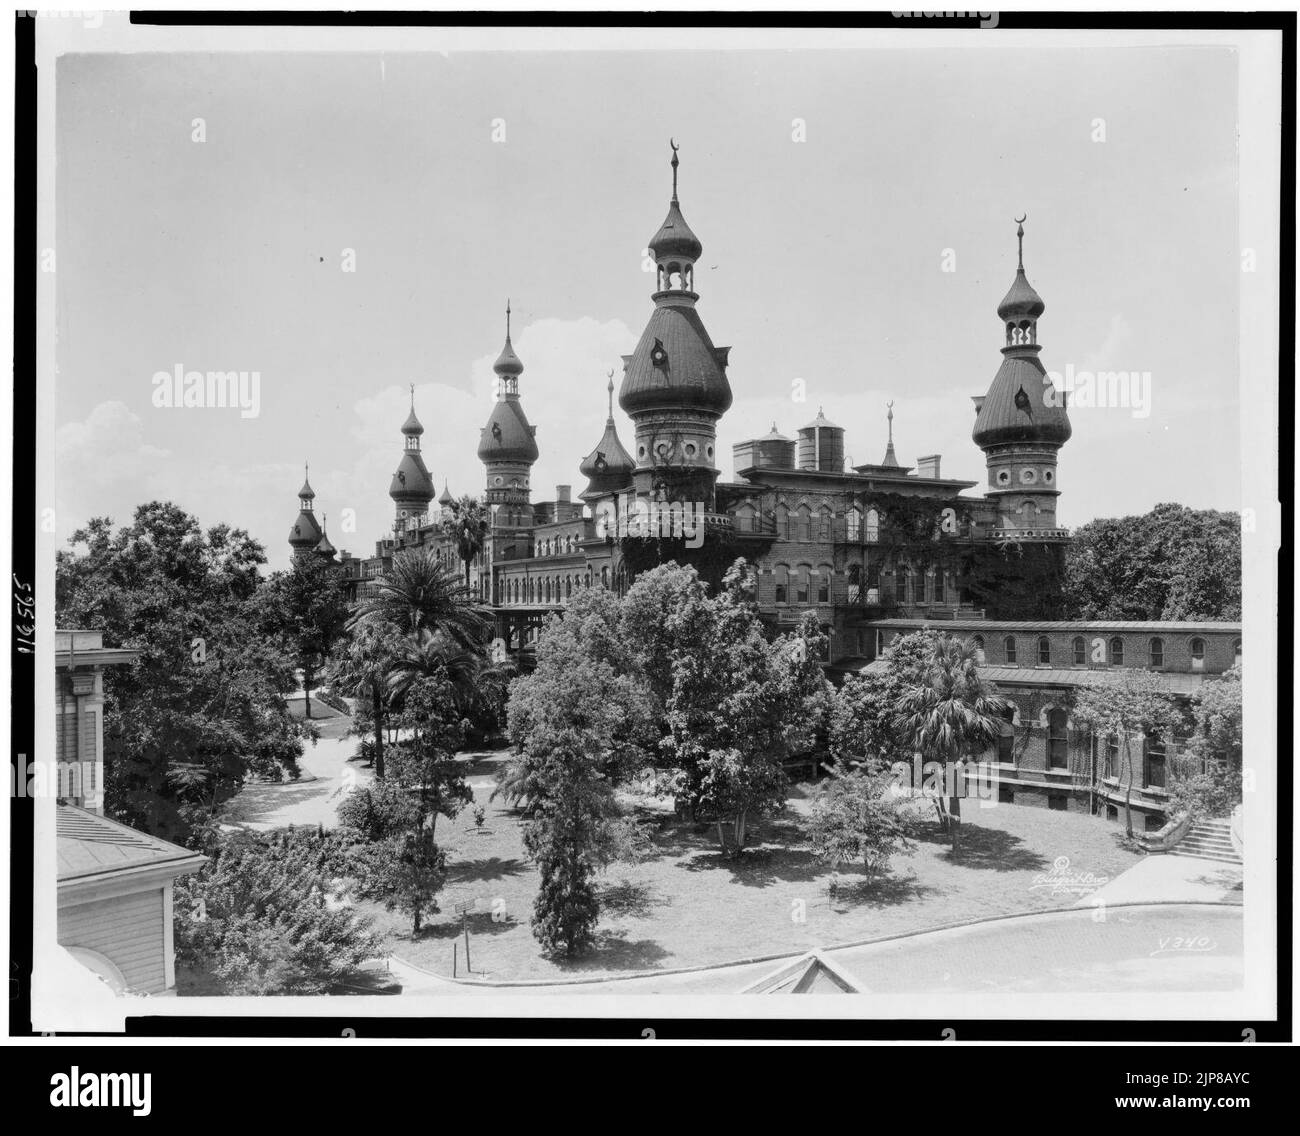 The Tampa Bay Hotel, now the University of Tampa, Tampa, Florida Stock Photo